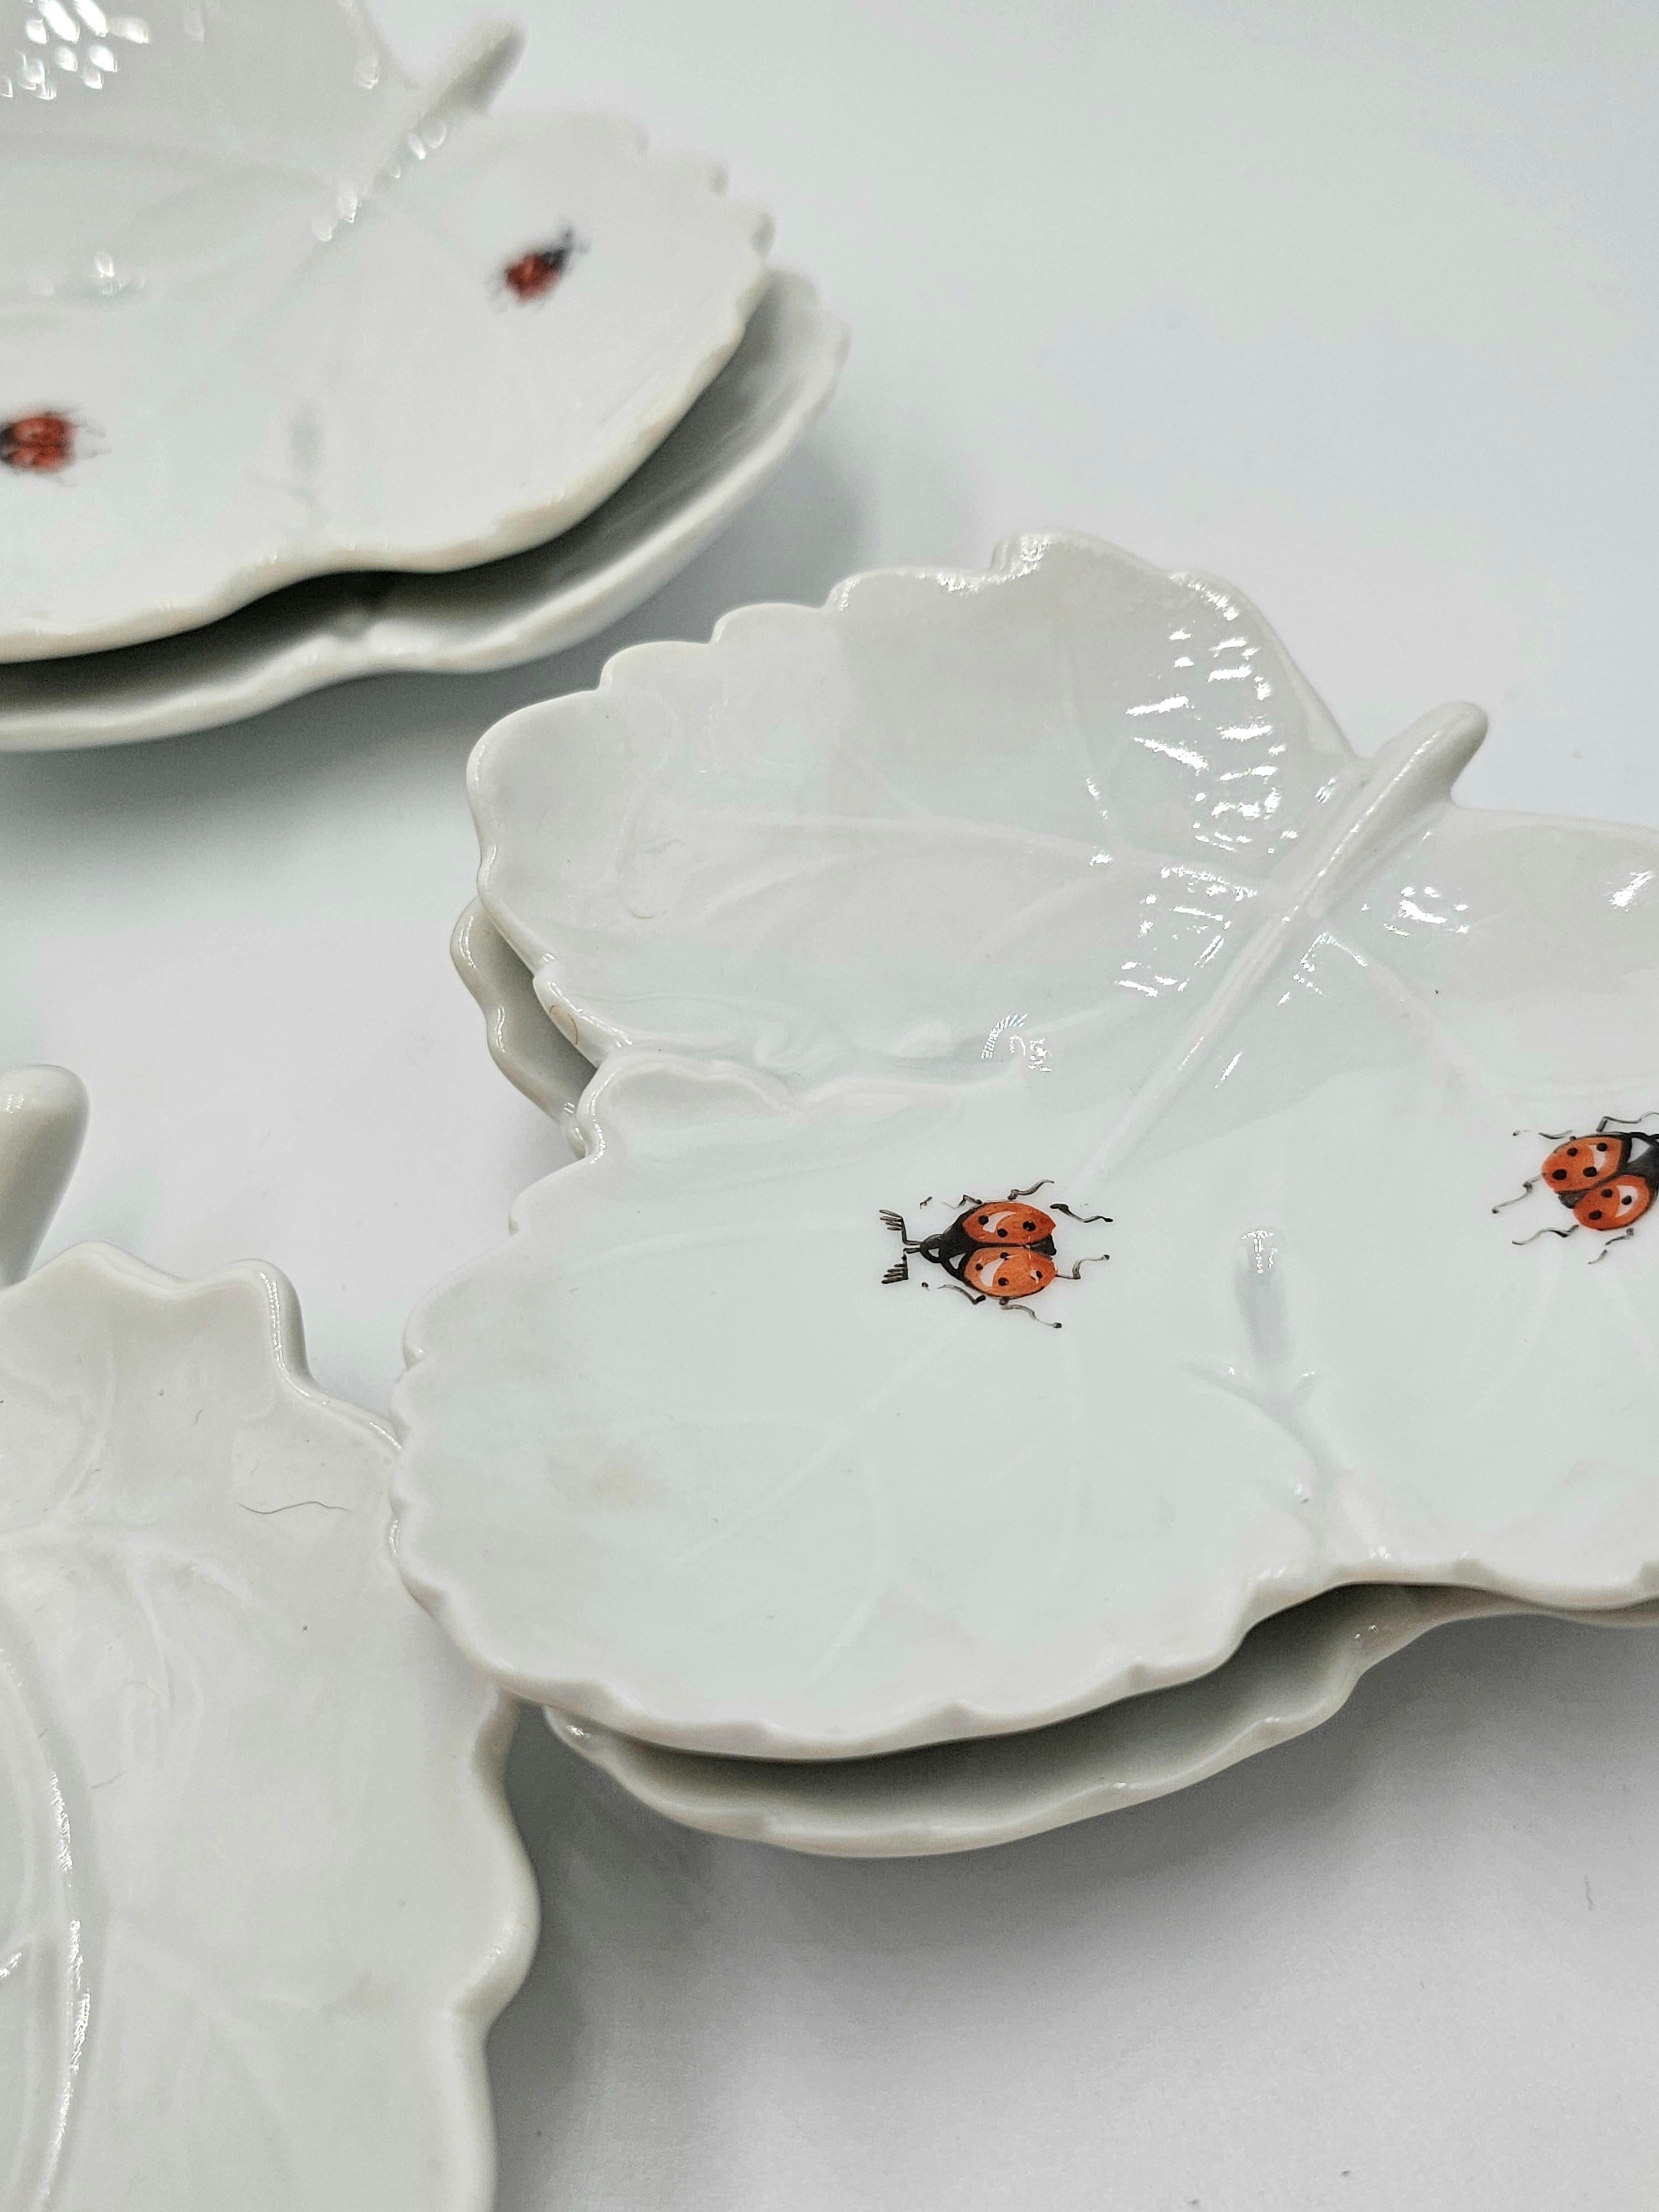 Set of 9 porcelain dishes. Each is hand painted with 2 ladybugs.
Stamped in the bottom Ludwigsburg. 
Ludwigsburg porcelain was a famous porcelain manufacturer in Germany .
2 seizes of dishes. 1 large dish 14x15 cm, the 8 small dishes 9x9 cm.
1 small